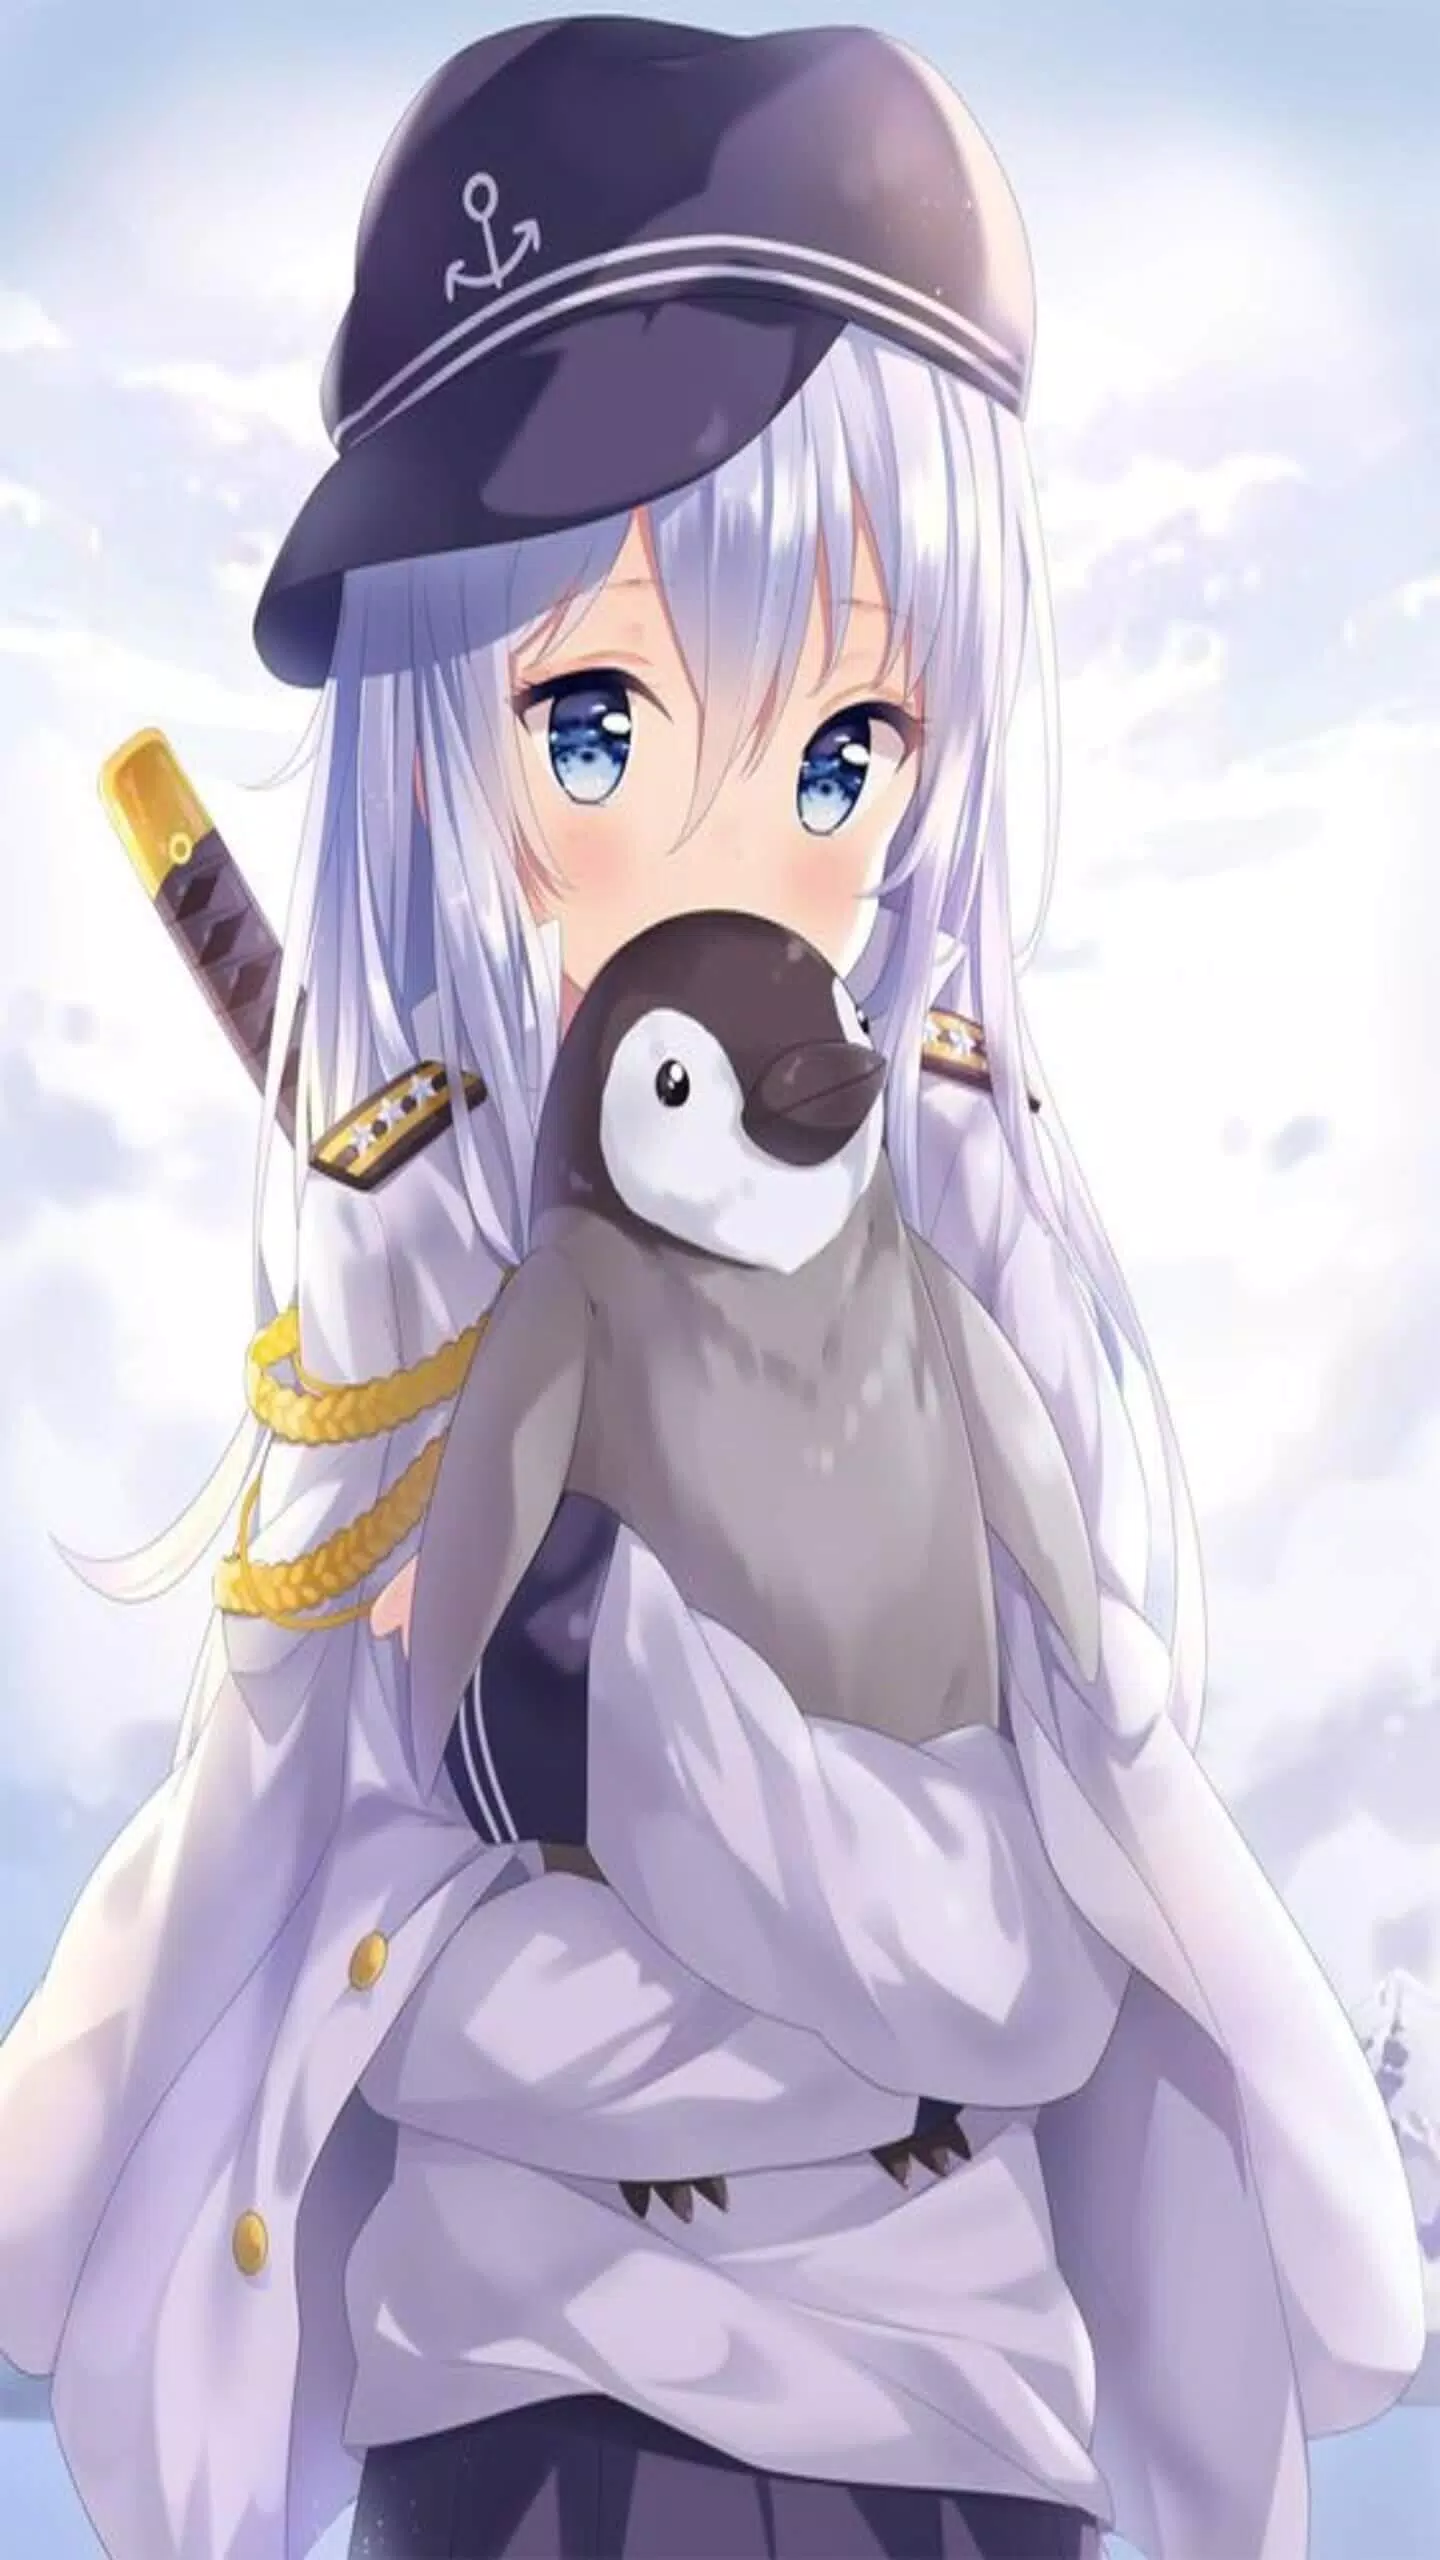 Kawaii Anime Wallpaper HD::Appstore for Android